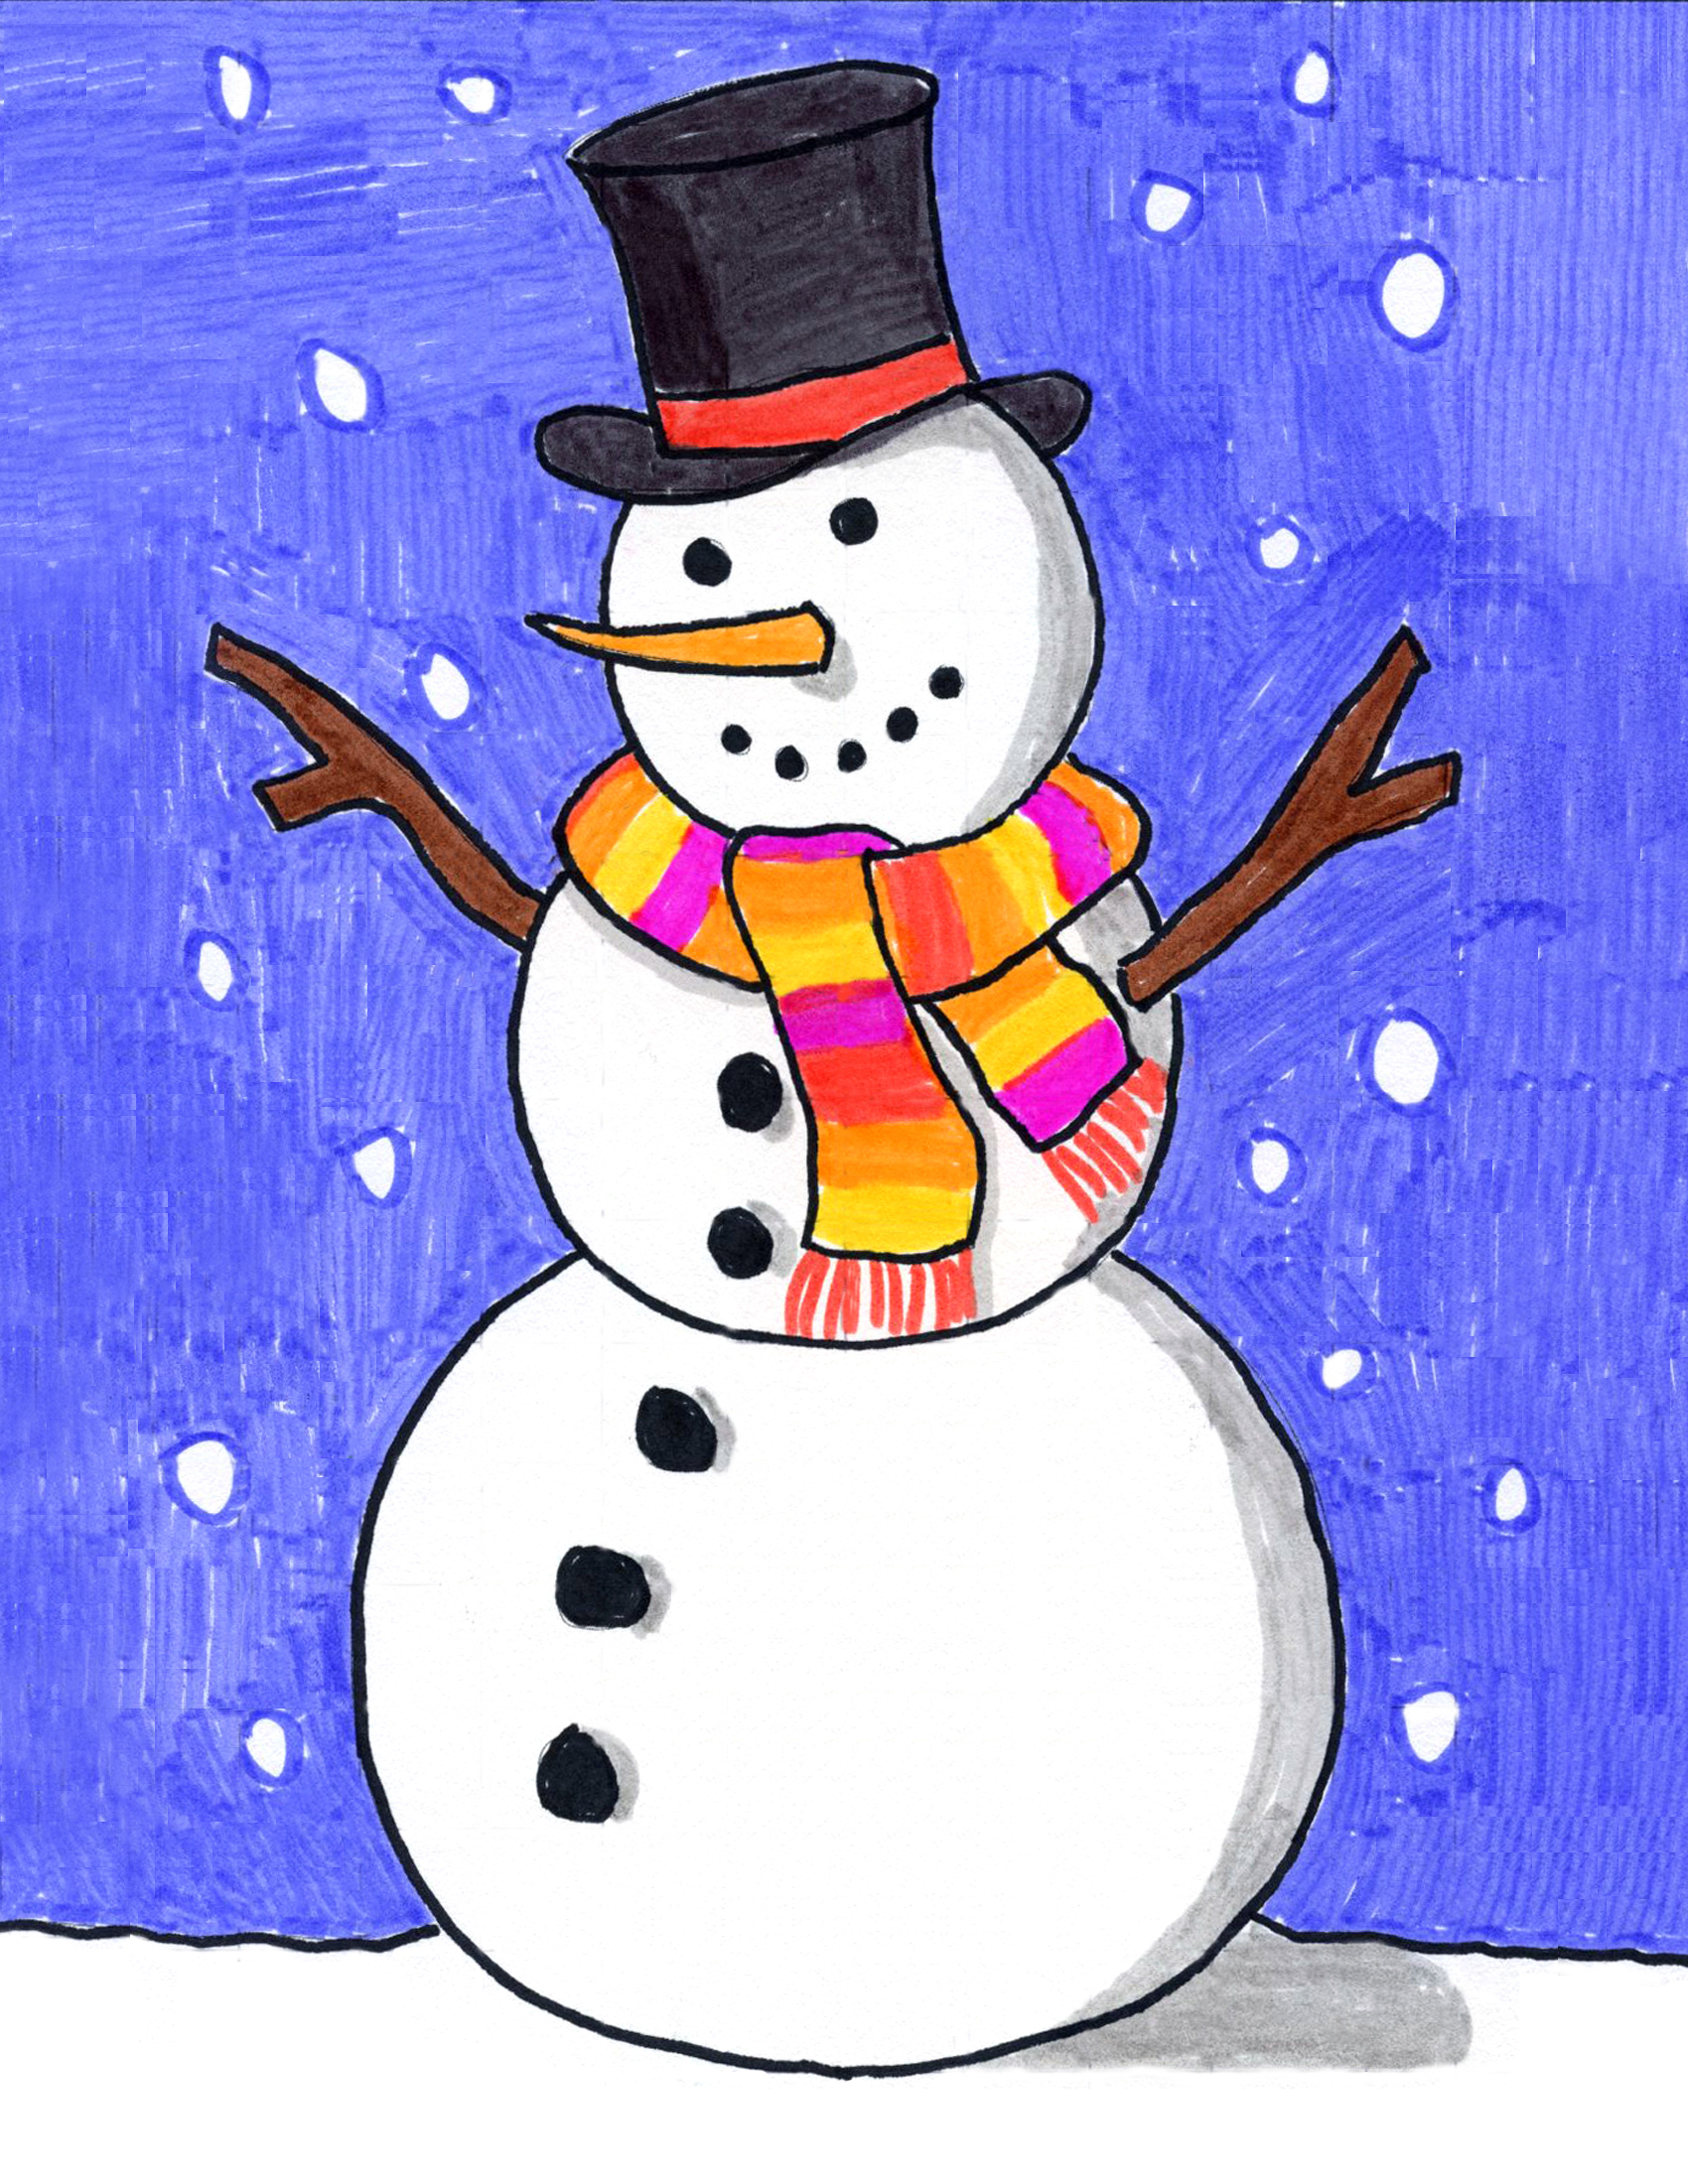 Detail Image Of A Snowman Nomer 2